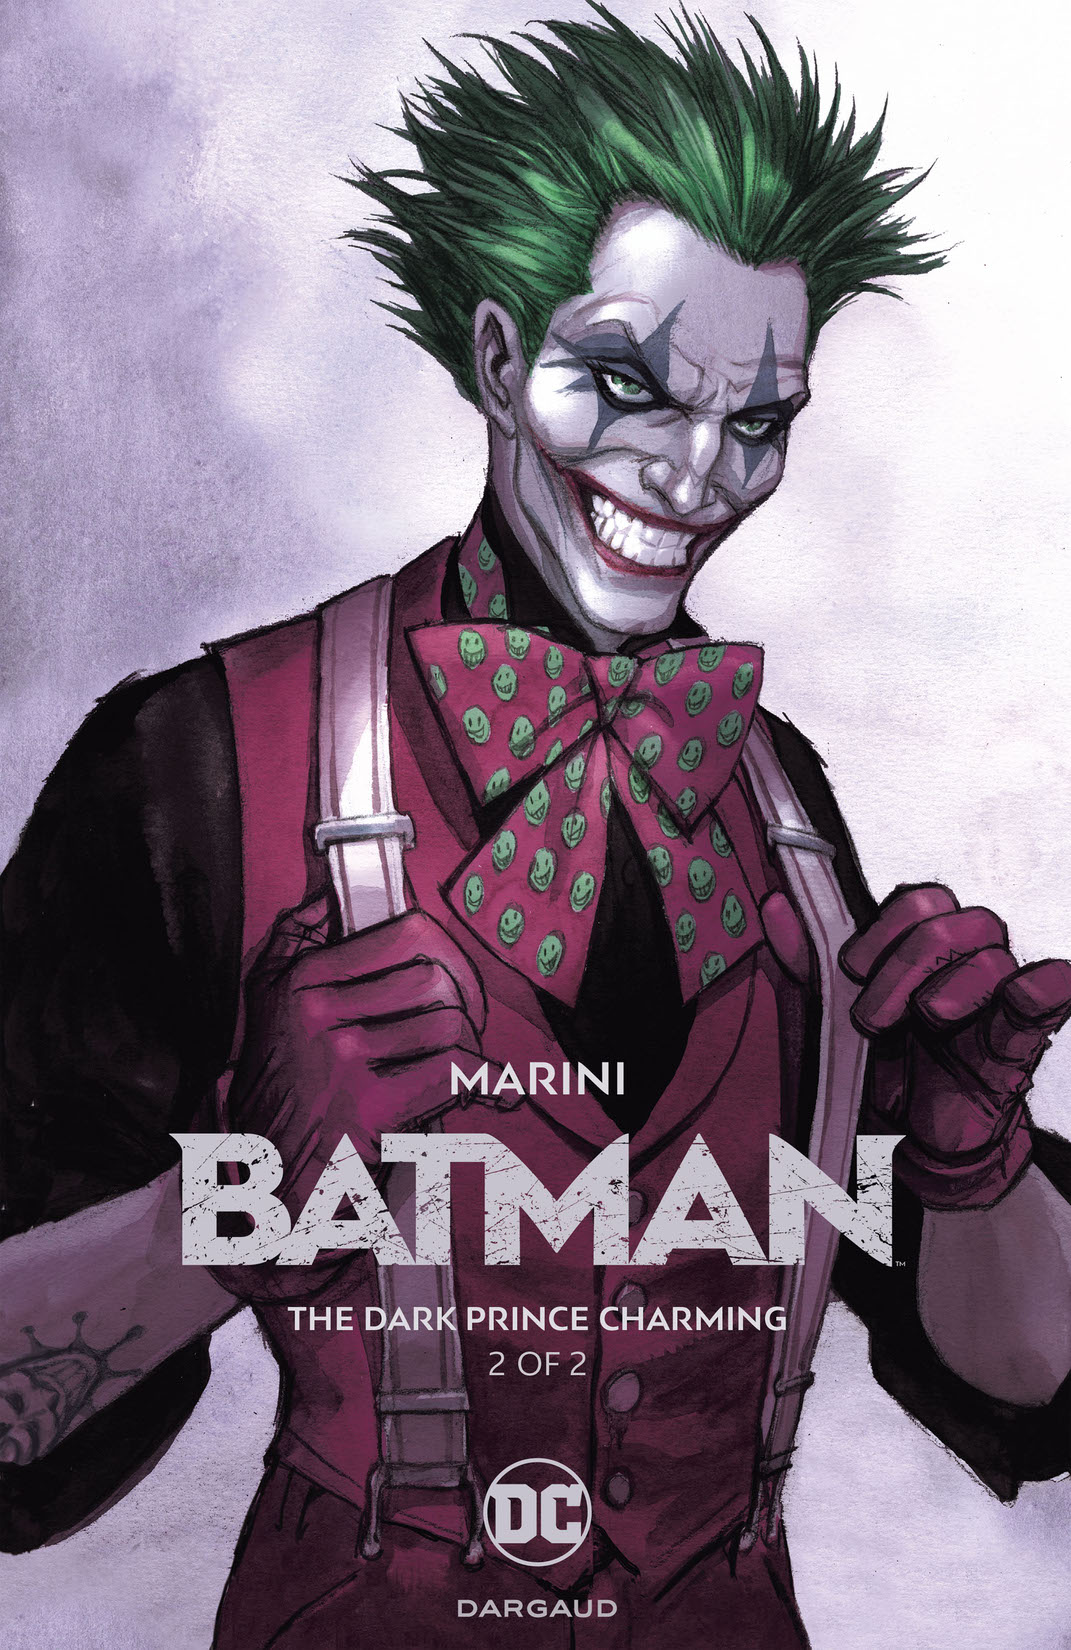 Batman: The Dark Prince Charming #2 preview images